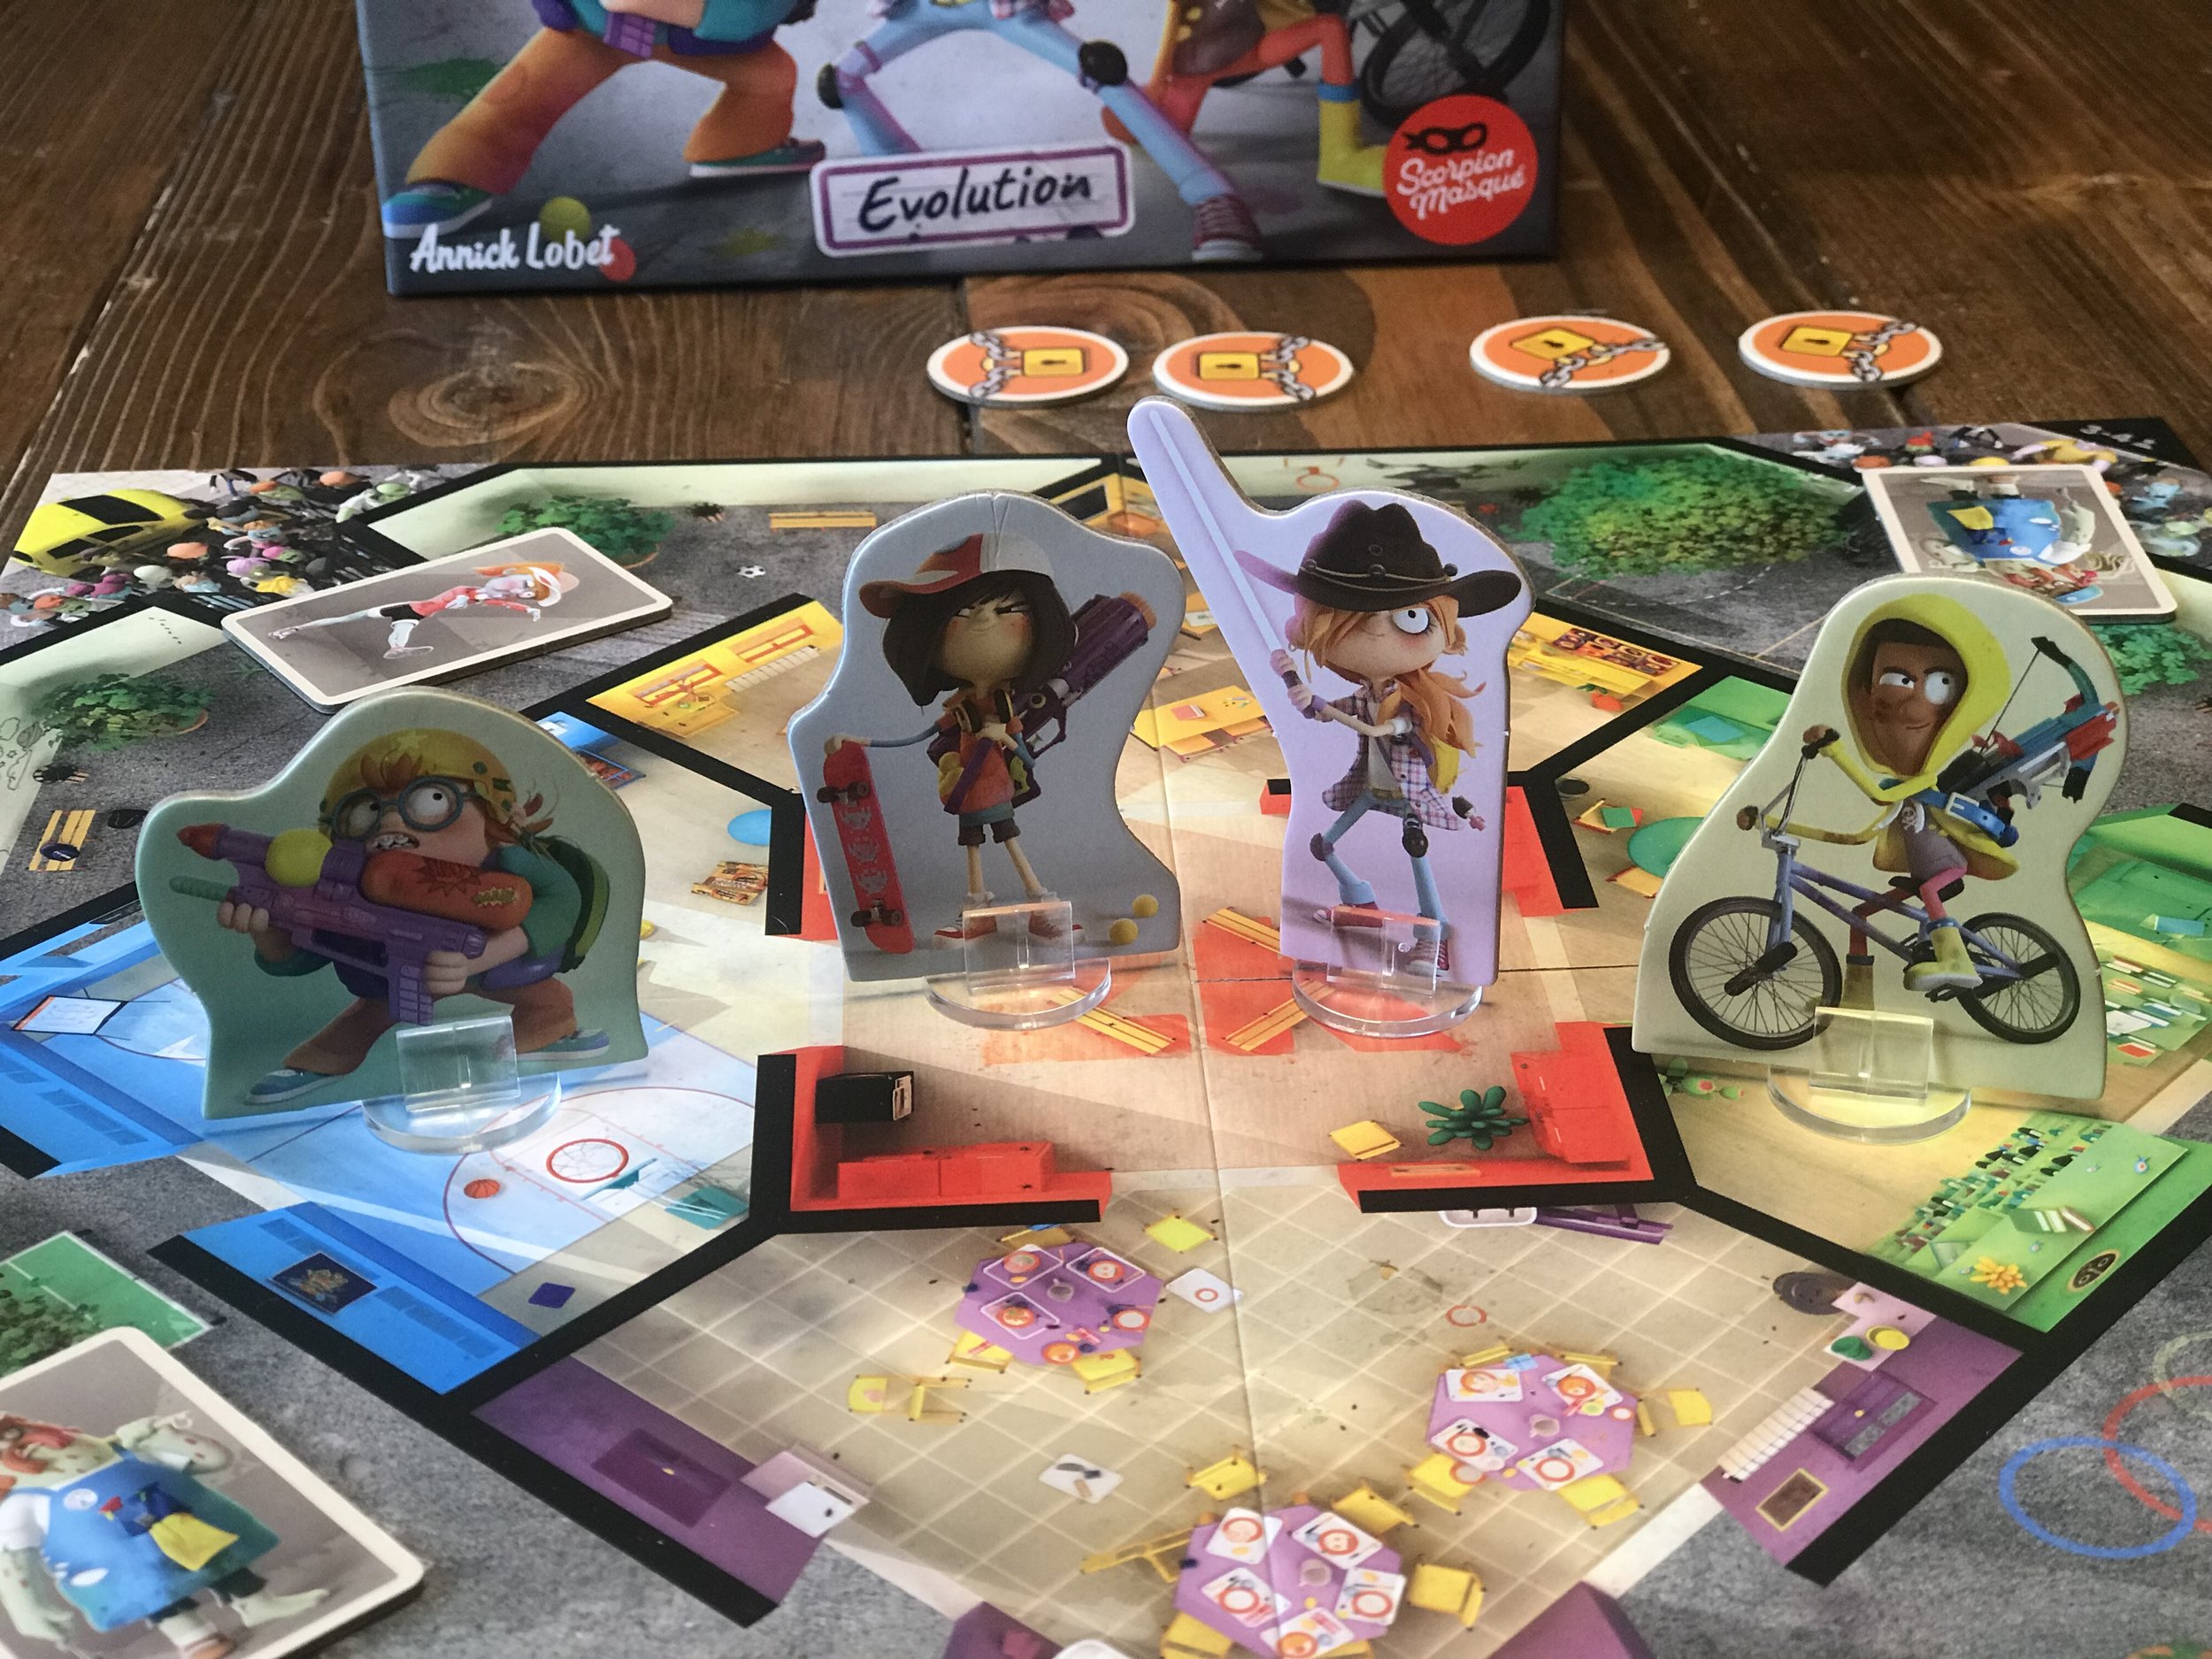 Zombie Kidz Evolution: The Family Game that Evolves Over Time